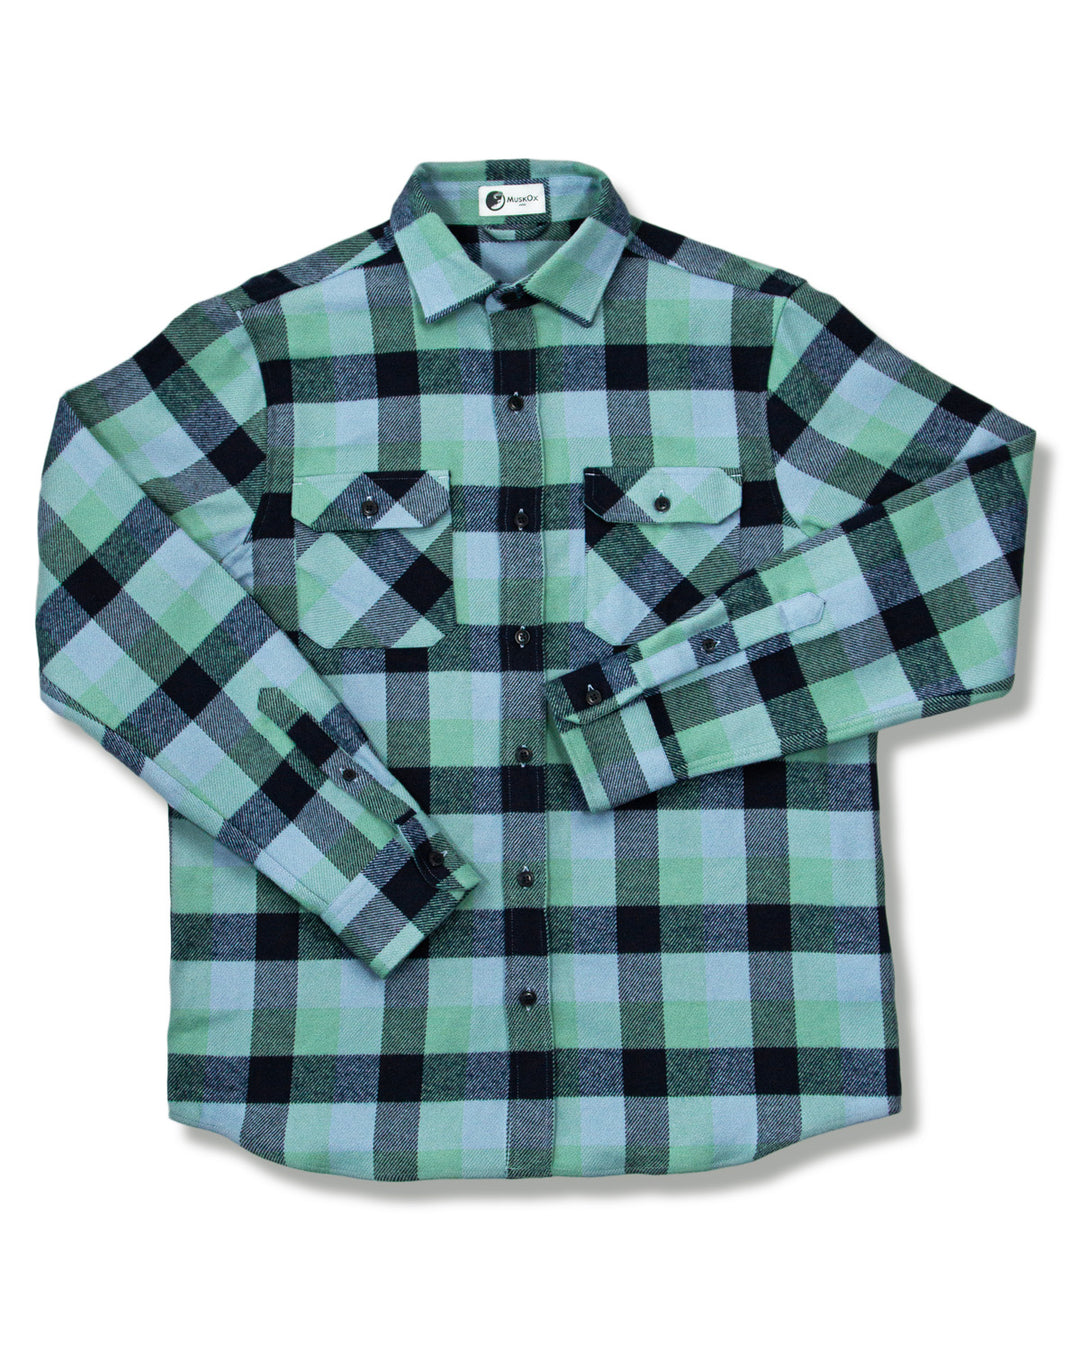 Field Grand Flannel in Fern Green and Blue, 100% Cotton Flannel Shirt for Men by MuskOx